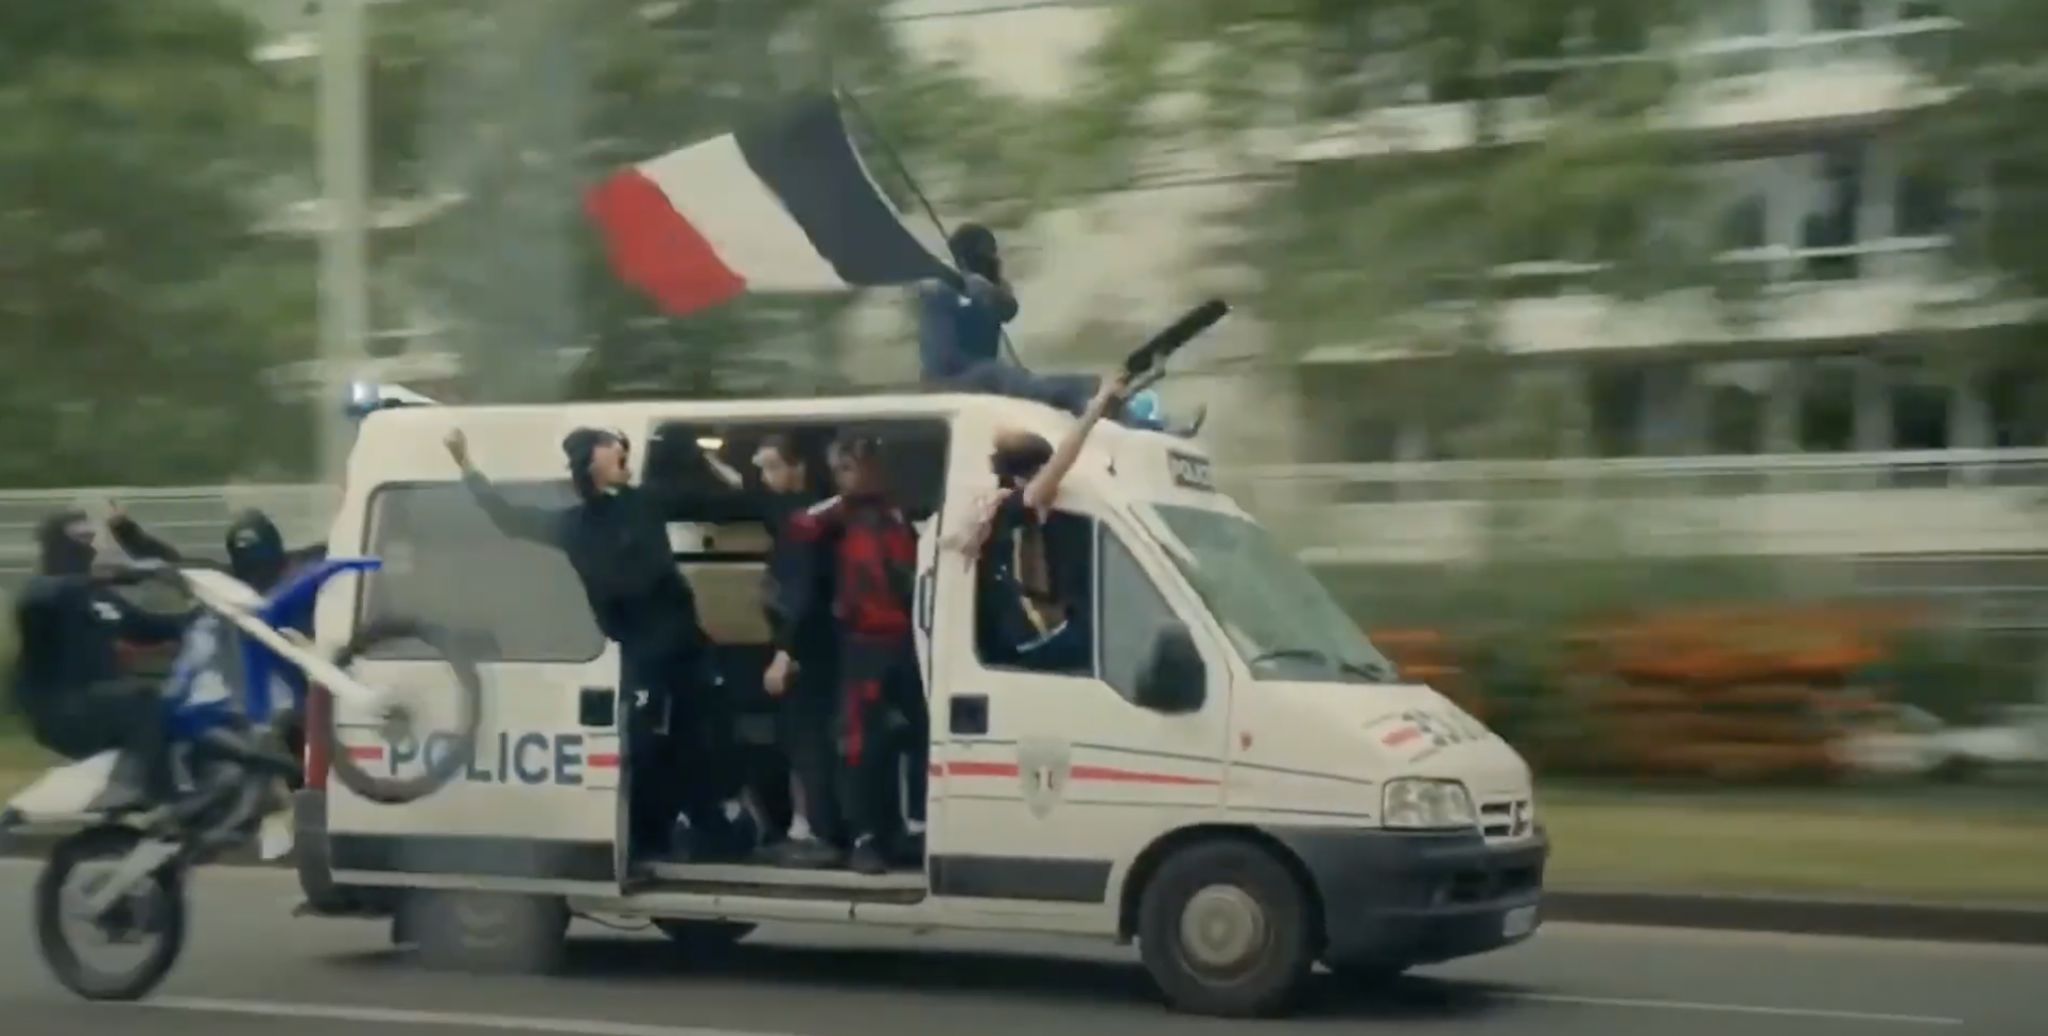 Image of a stolen French police van from the film, Athena